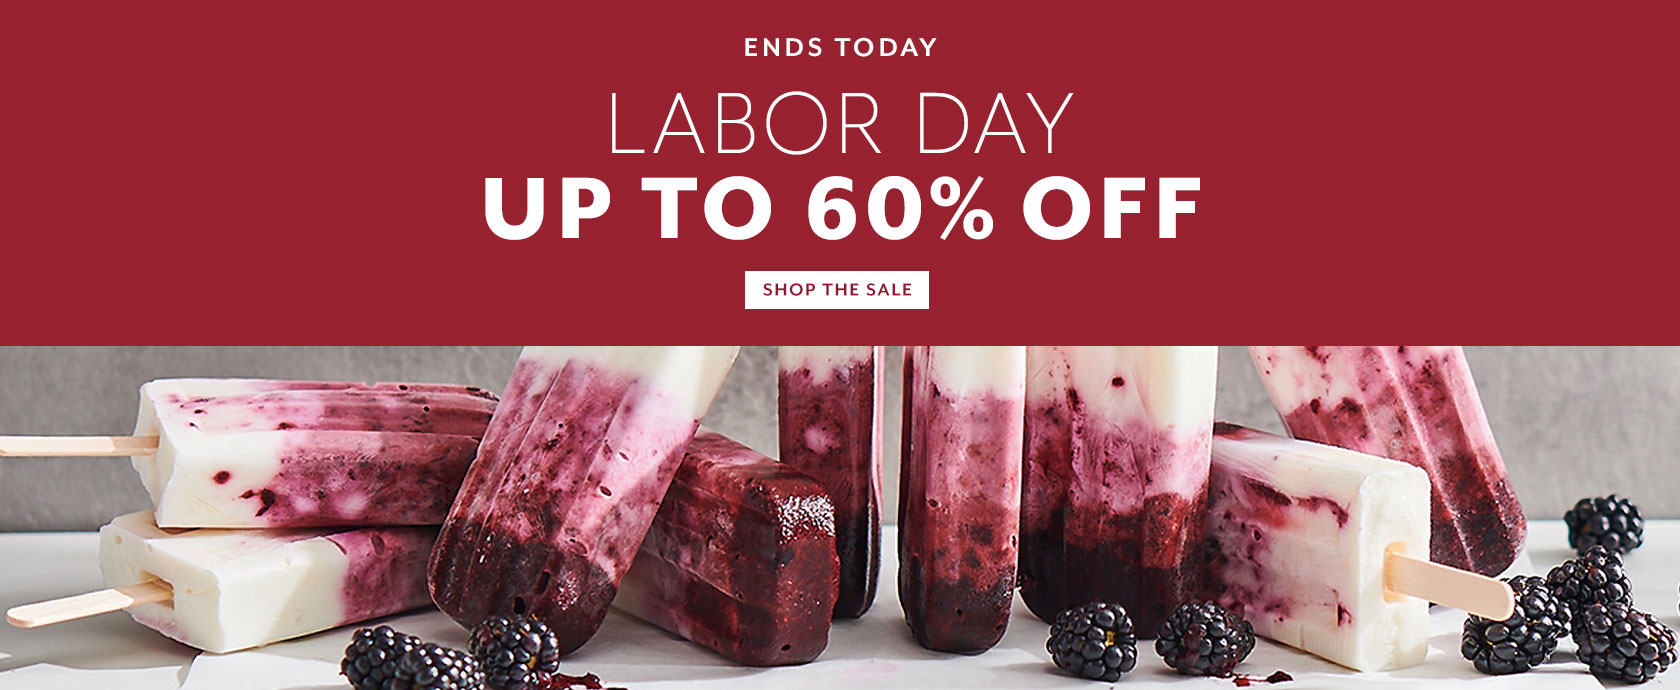 Ends today Labor Day up to 60% off, shop the sale.